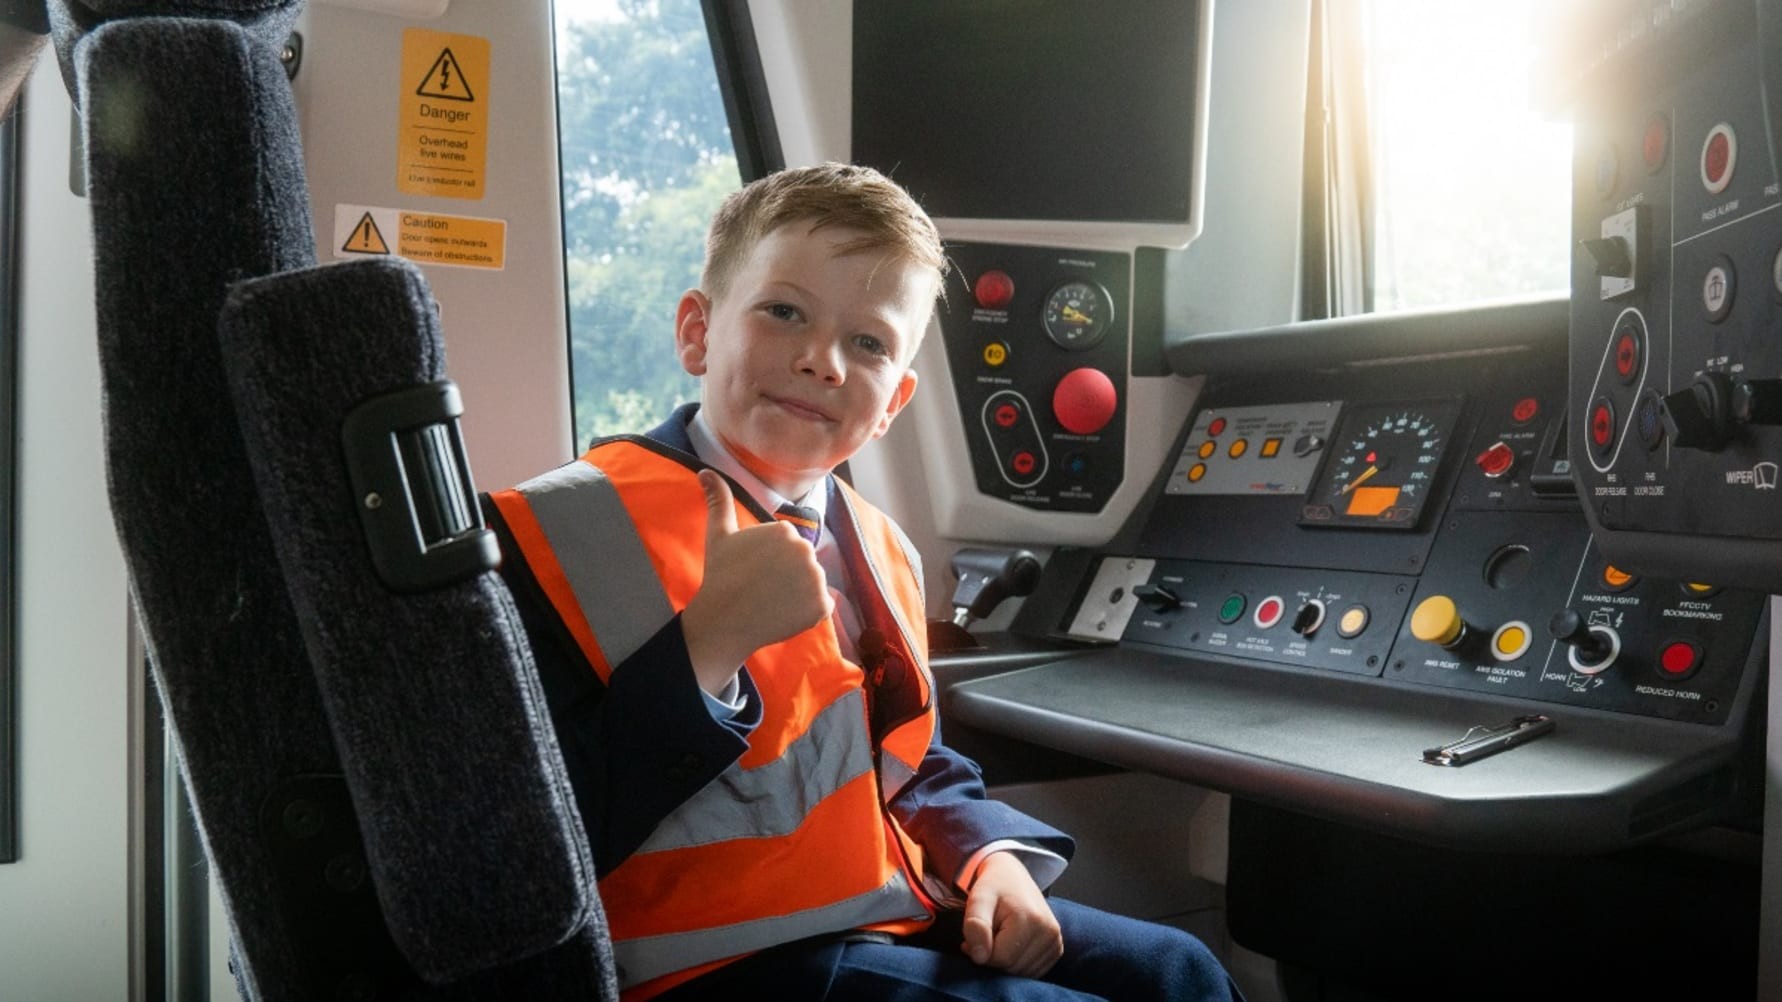 All aboard! West Midlands Railway searching for 'Junior Conductors' in new competition